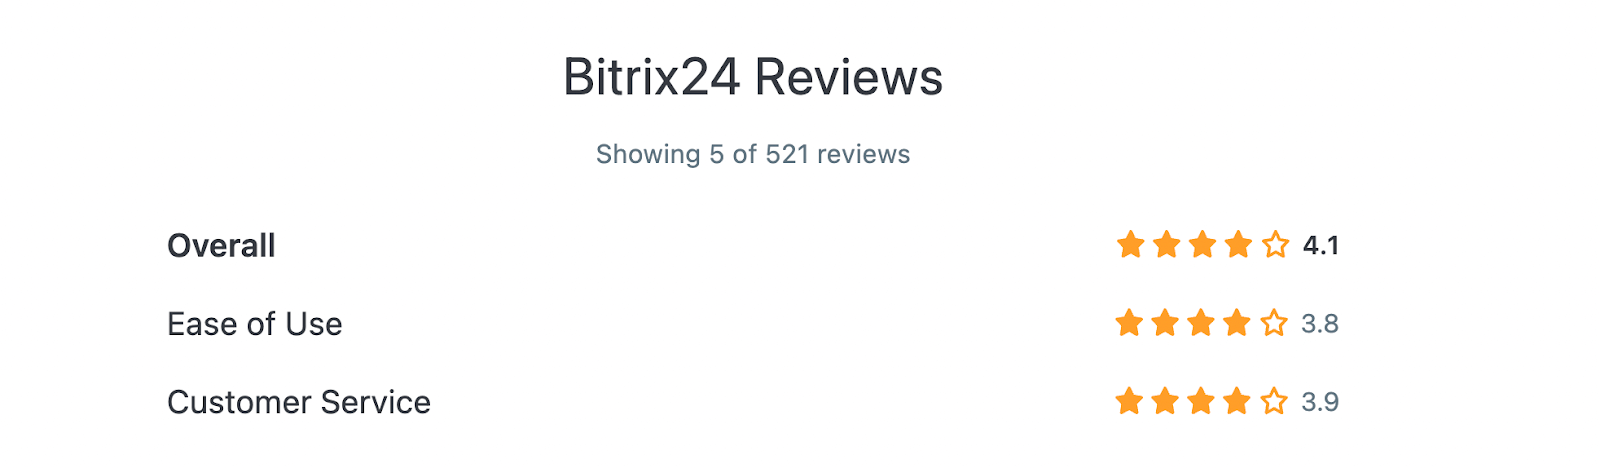 Bitrix24 reviews on Capterra (Overall: 4.1, Ease of Use: 3.8, Customer Service: 3.9)